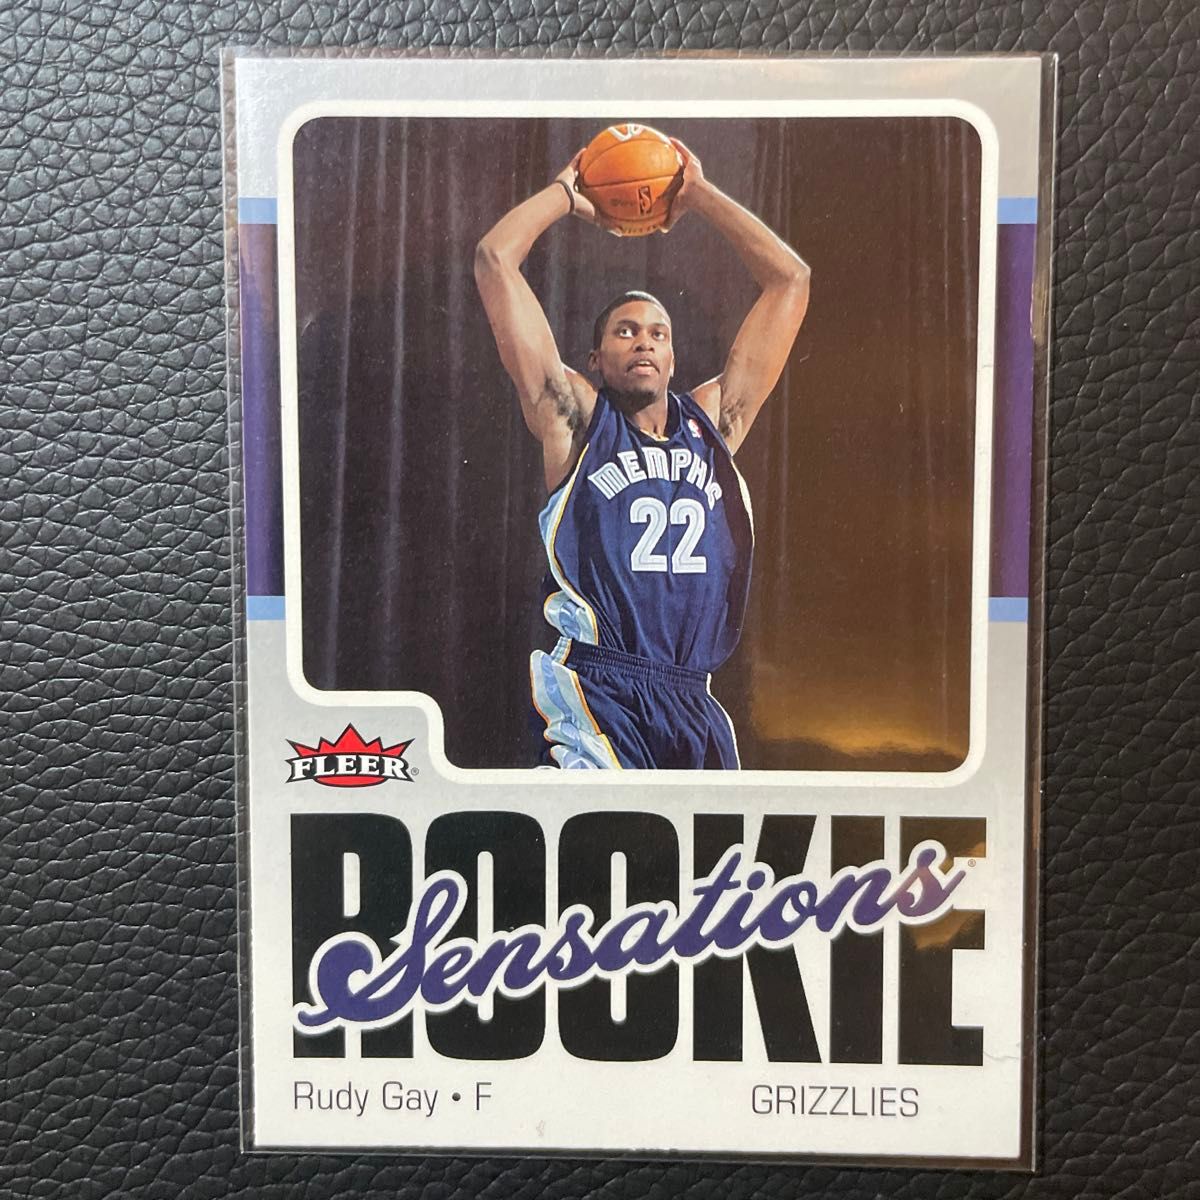 NBA Rudy Gay RC ルーキーカードセット Rookie